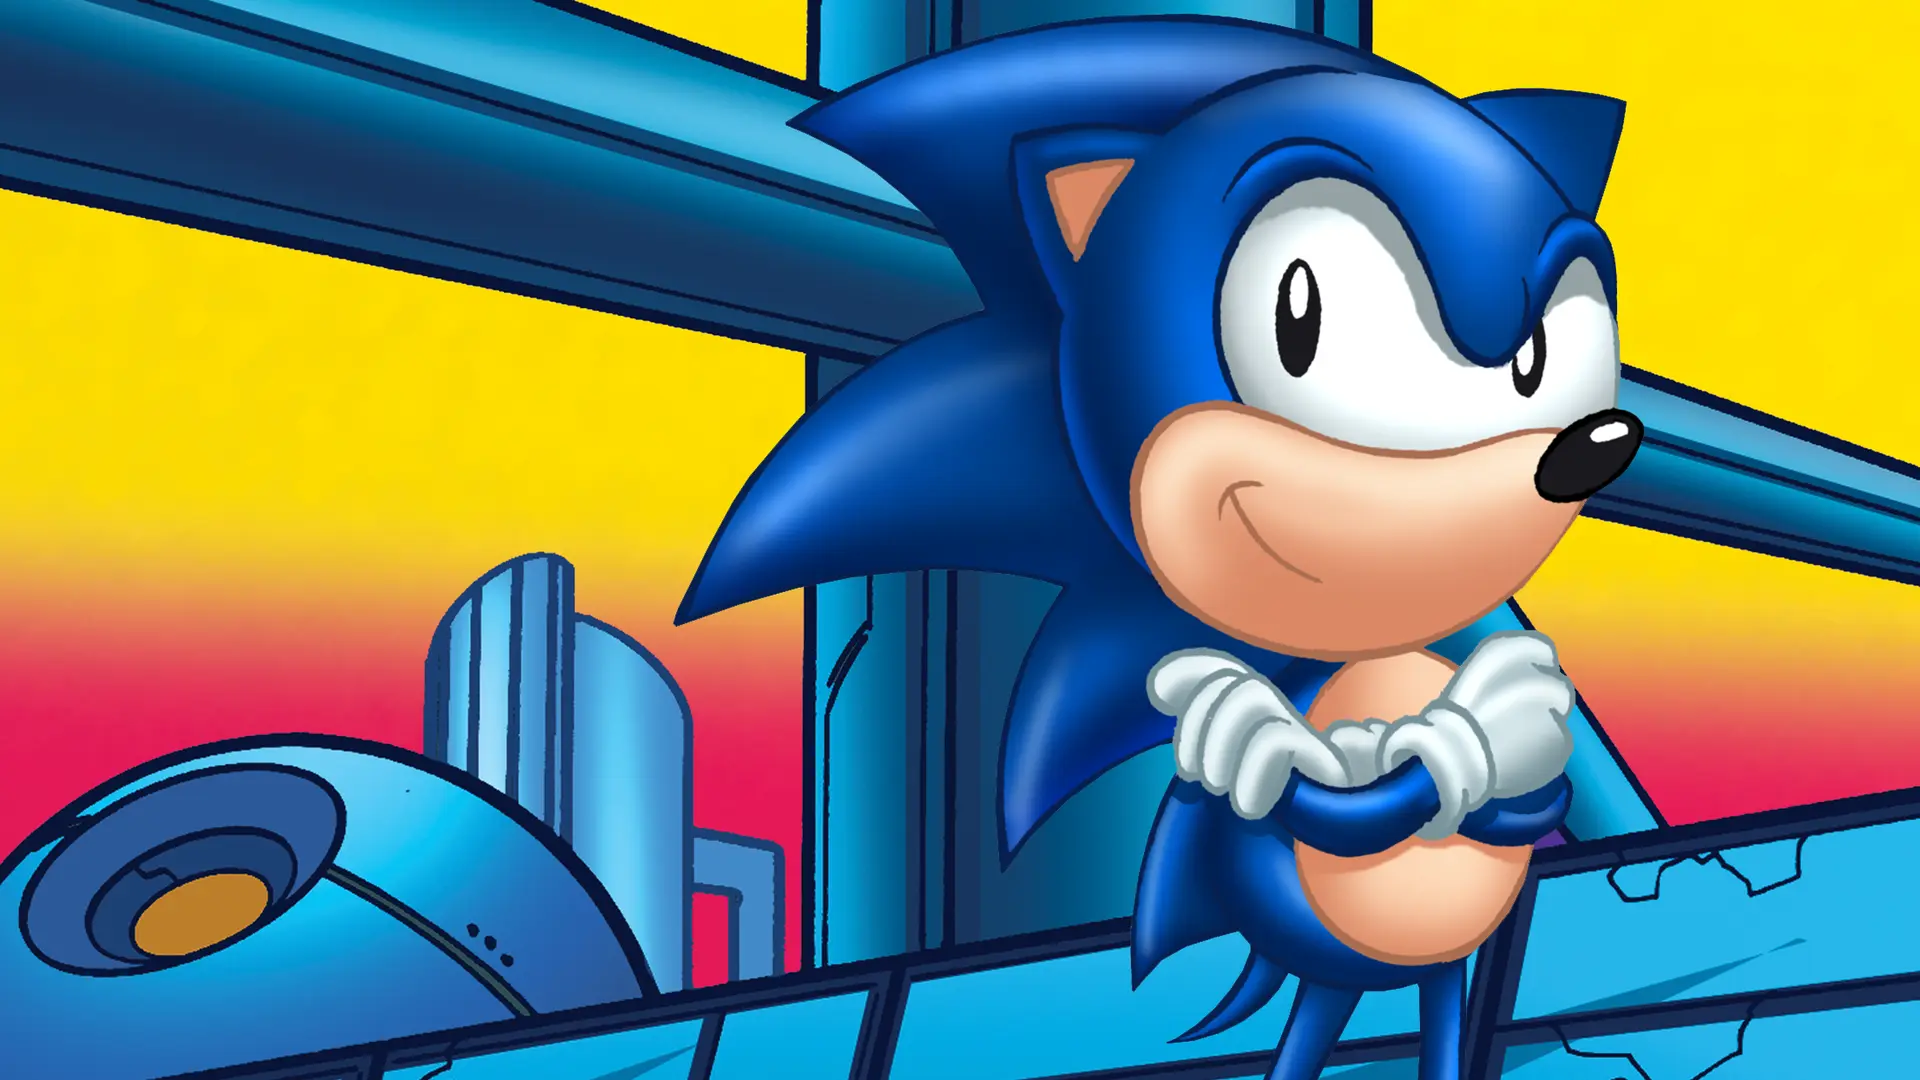 Sonic Hedgehog Background Images, HD Pictures and Wallpaper For Free  Download